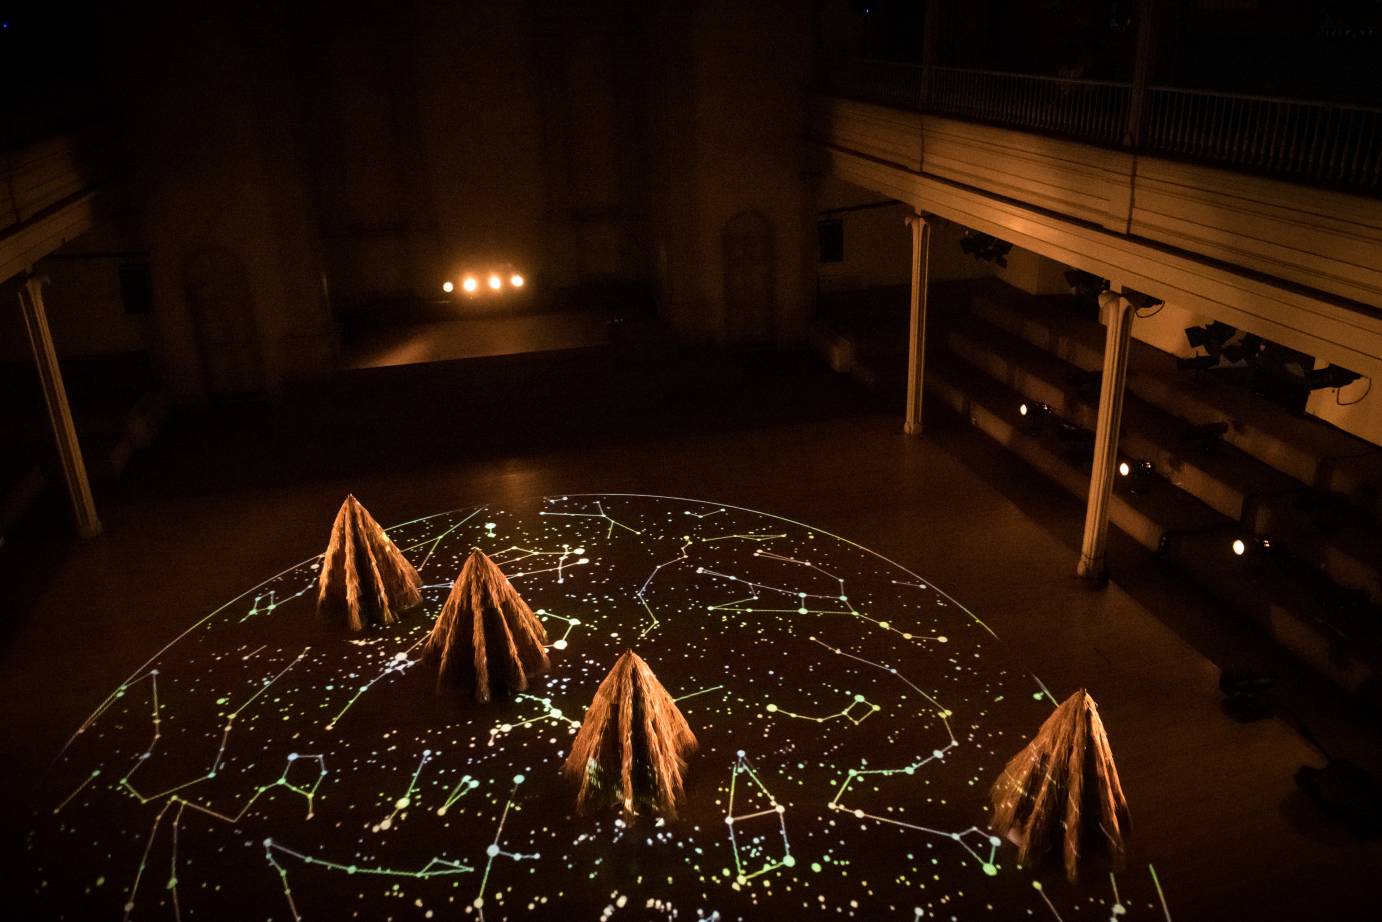 Four dancers with raffia cones covering them stand on a floor illuminated with a projection of stars and constellations